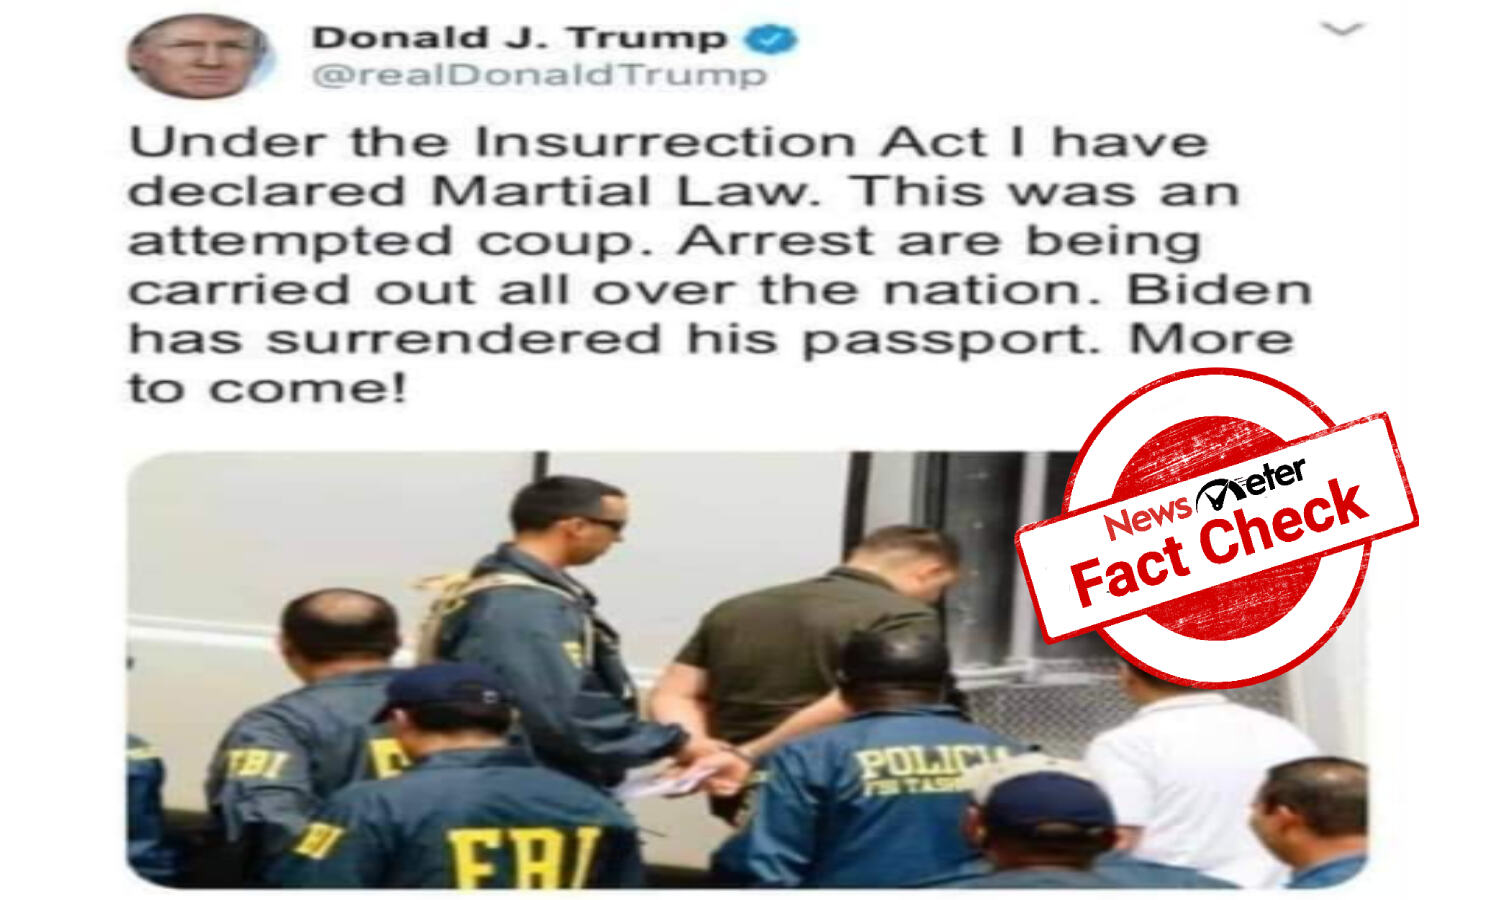 insurrection act vs martial law difference